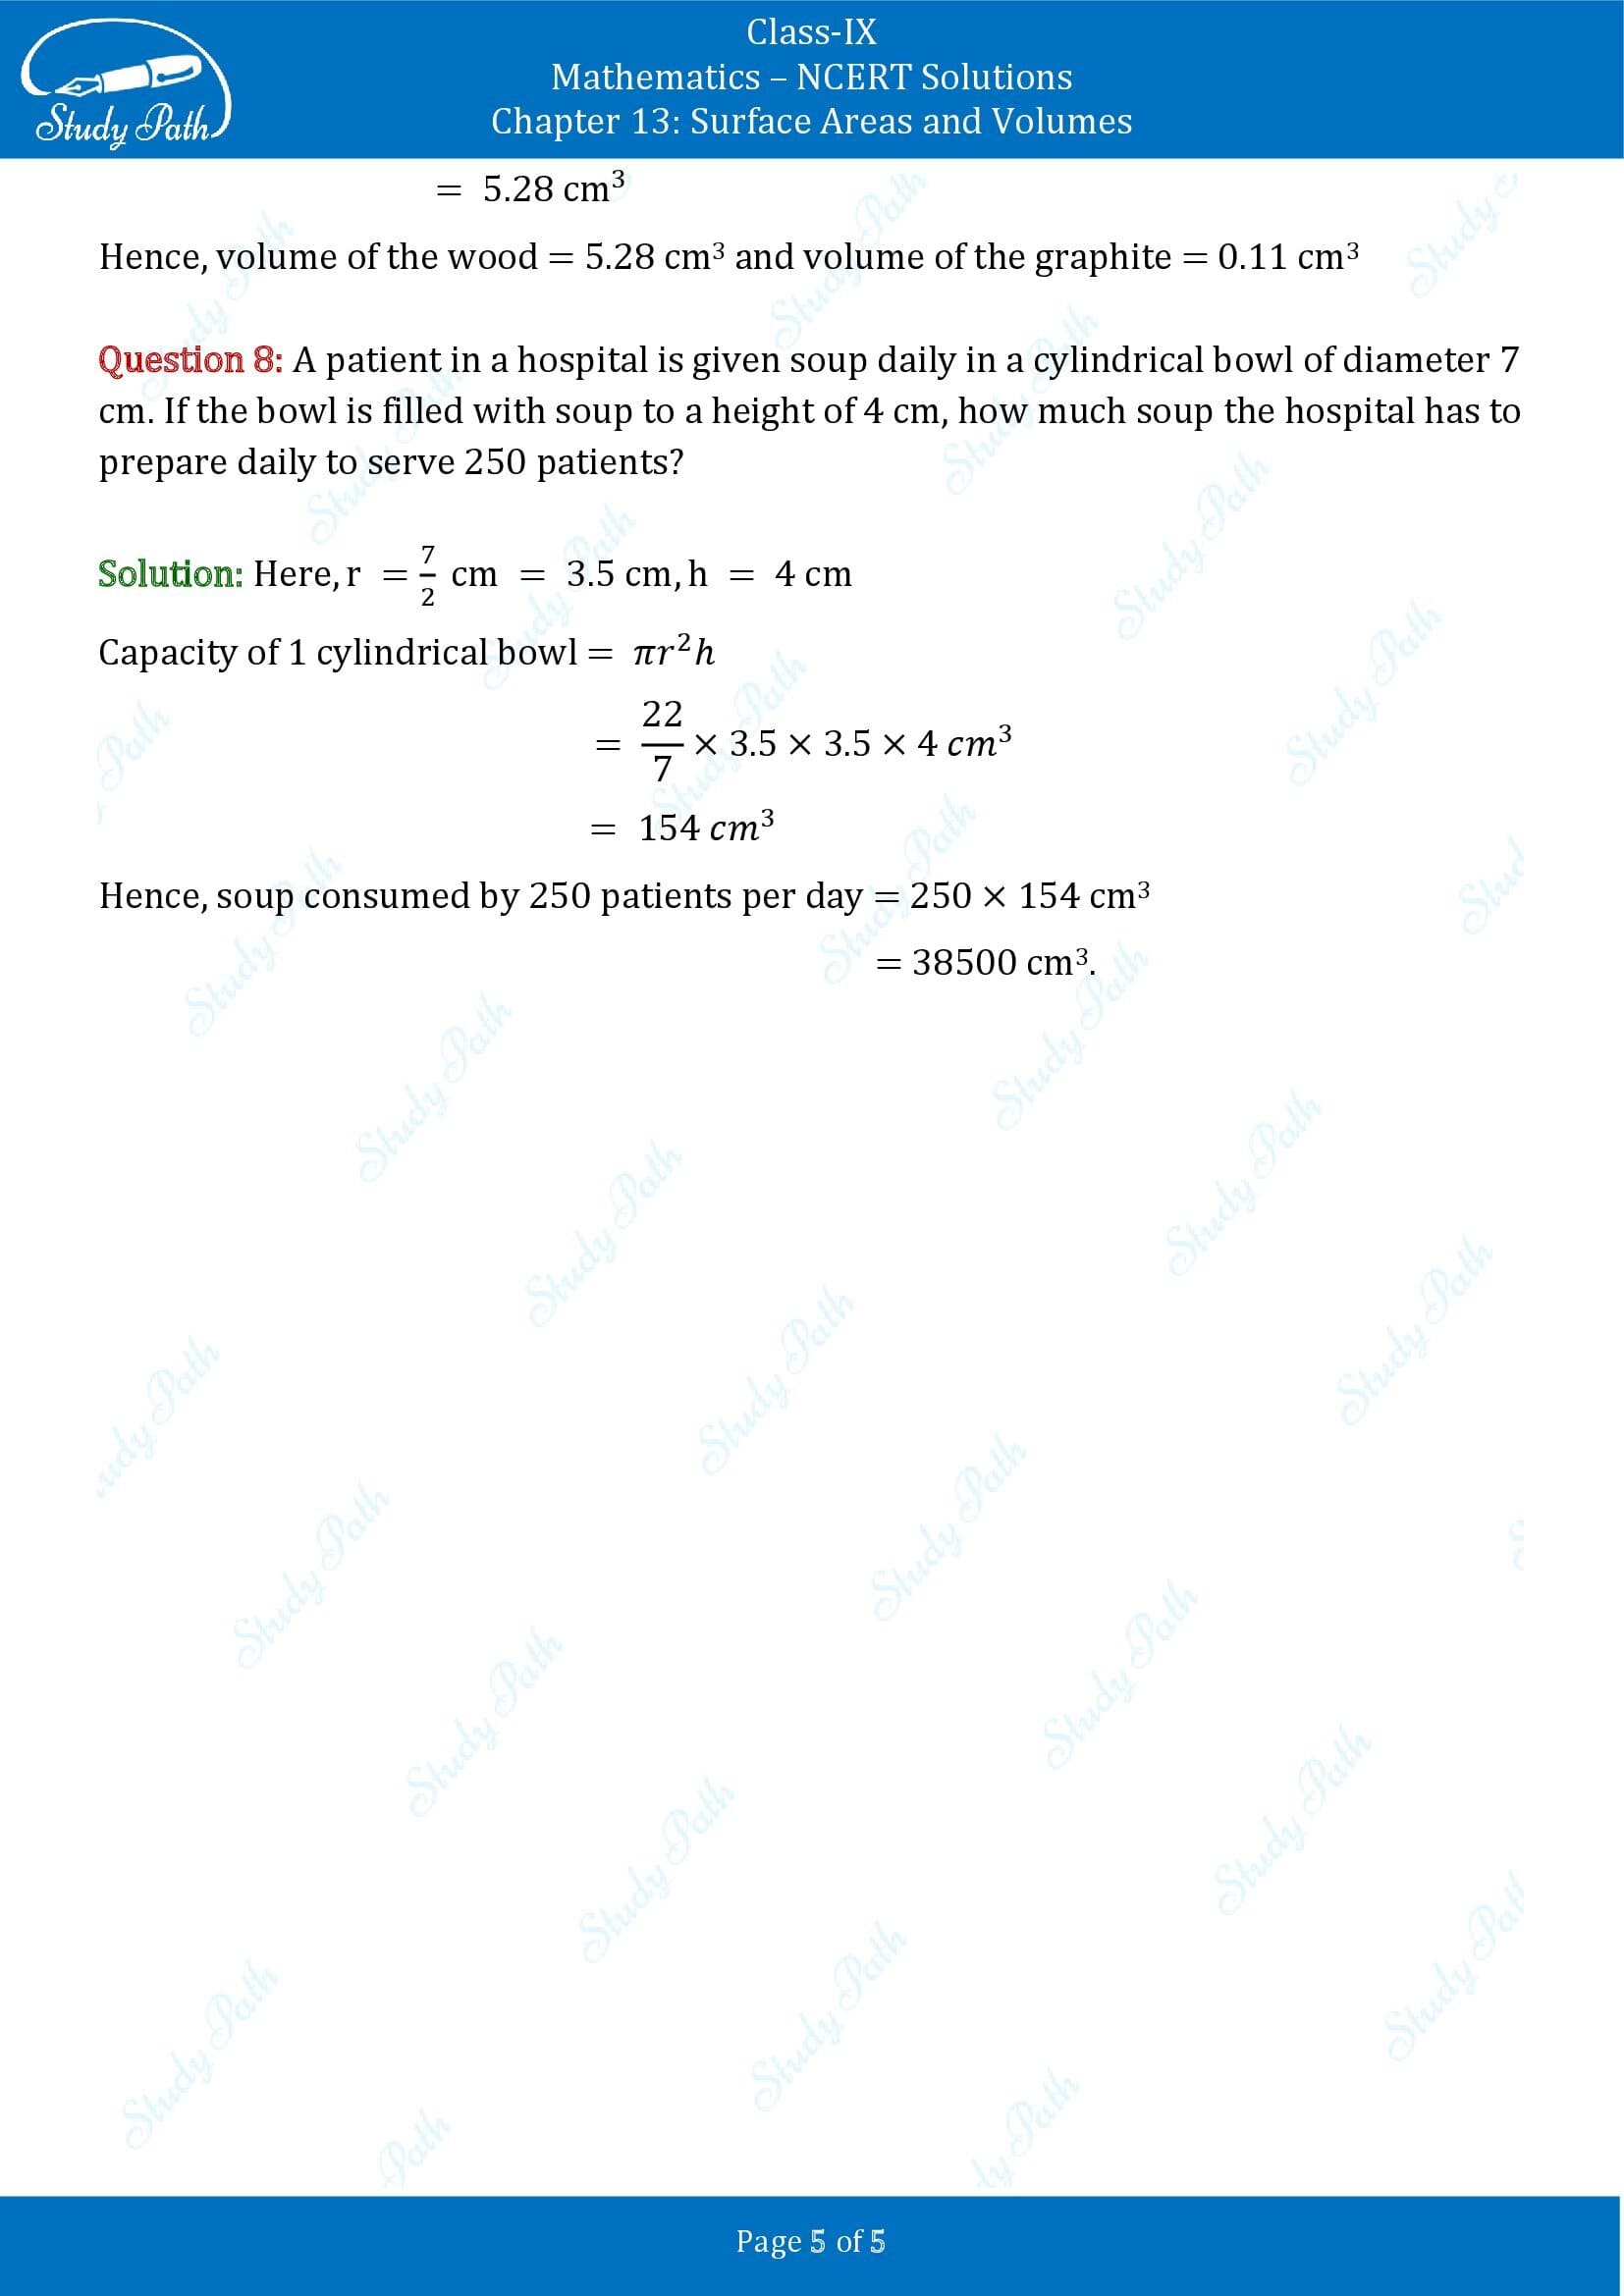 NCERT Solutions for Class 9 Maths Chapter 13 Surface Areas and Volumes Exercise 13.6 00005